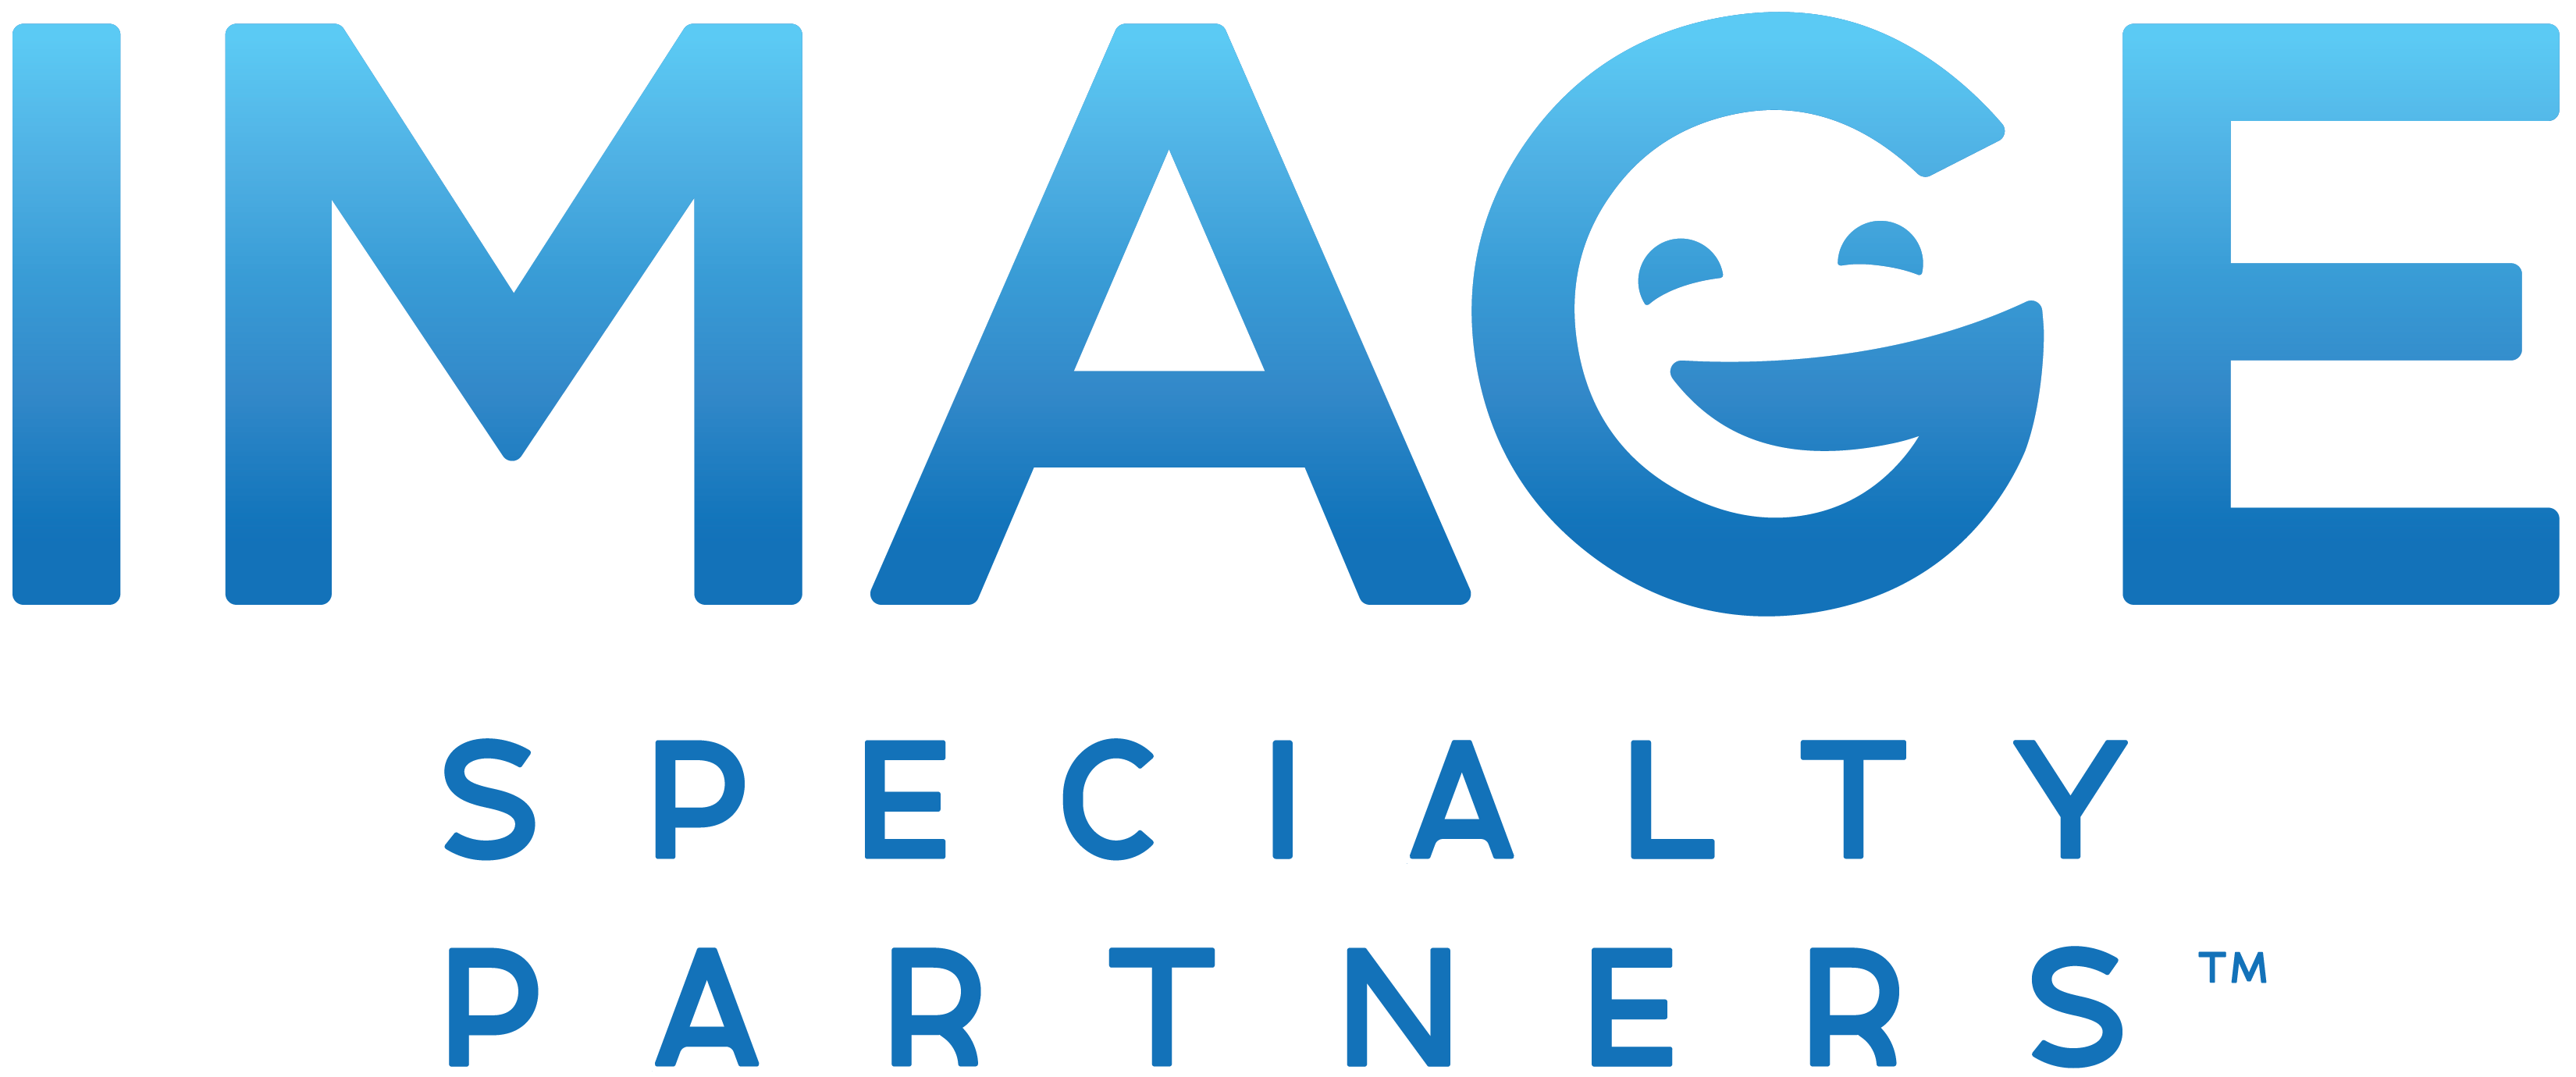 Image Specialty Partners™ Grows Its Presence in the California Central Valley